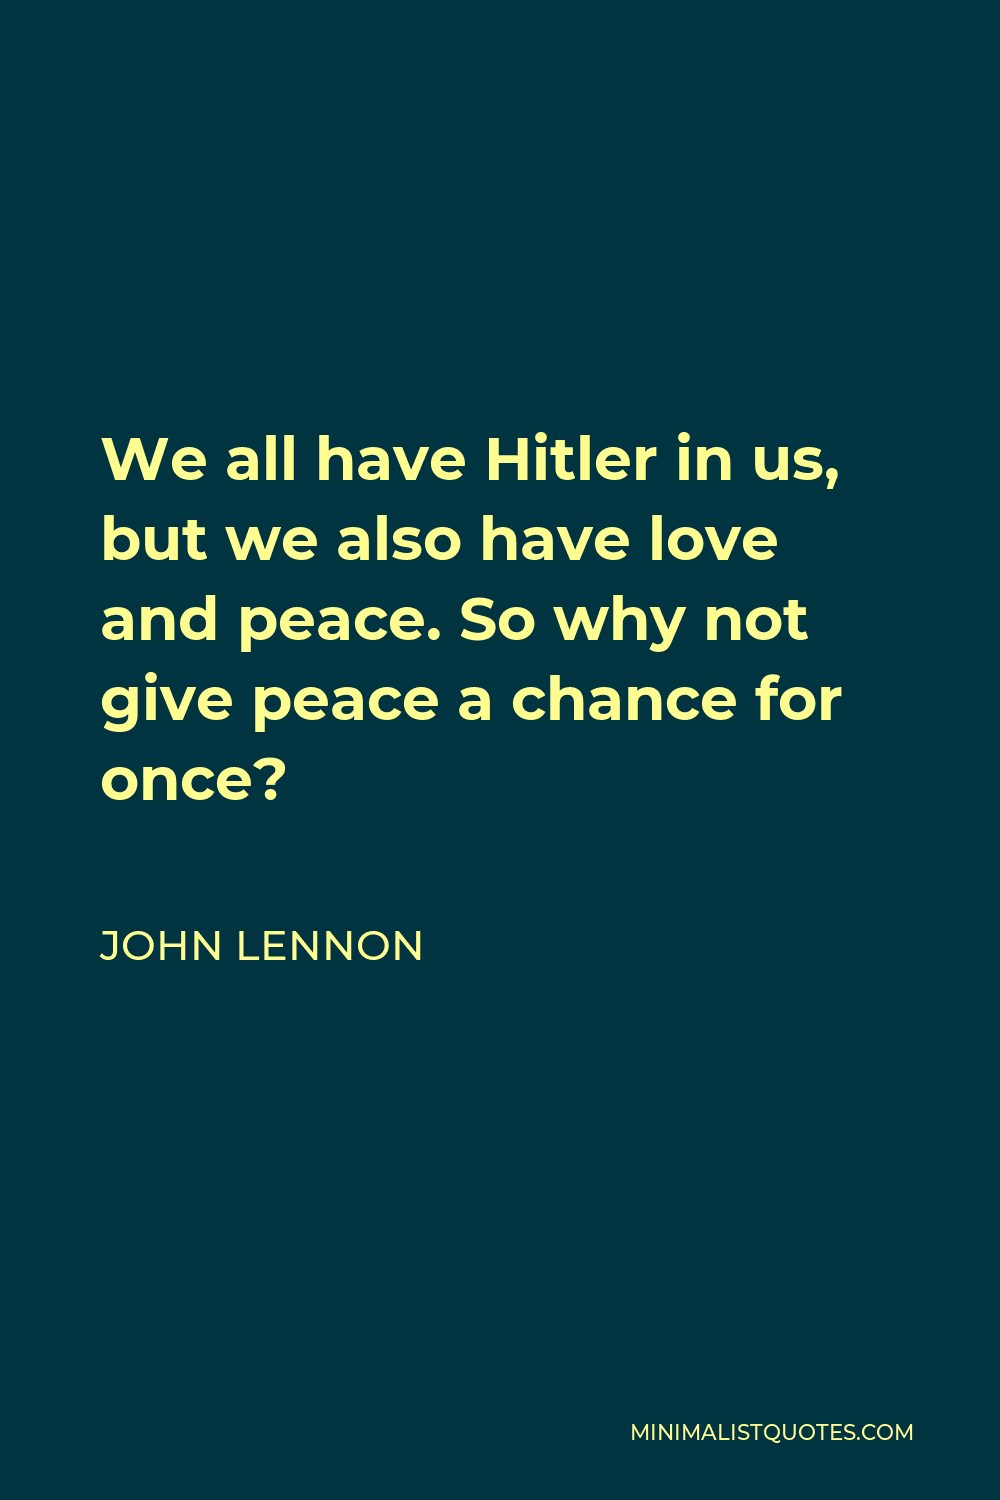 John Lennon Quote - We all have Hitler in us, but we also have love and peace. So why not give peace a chance for once?